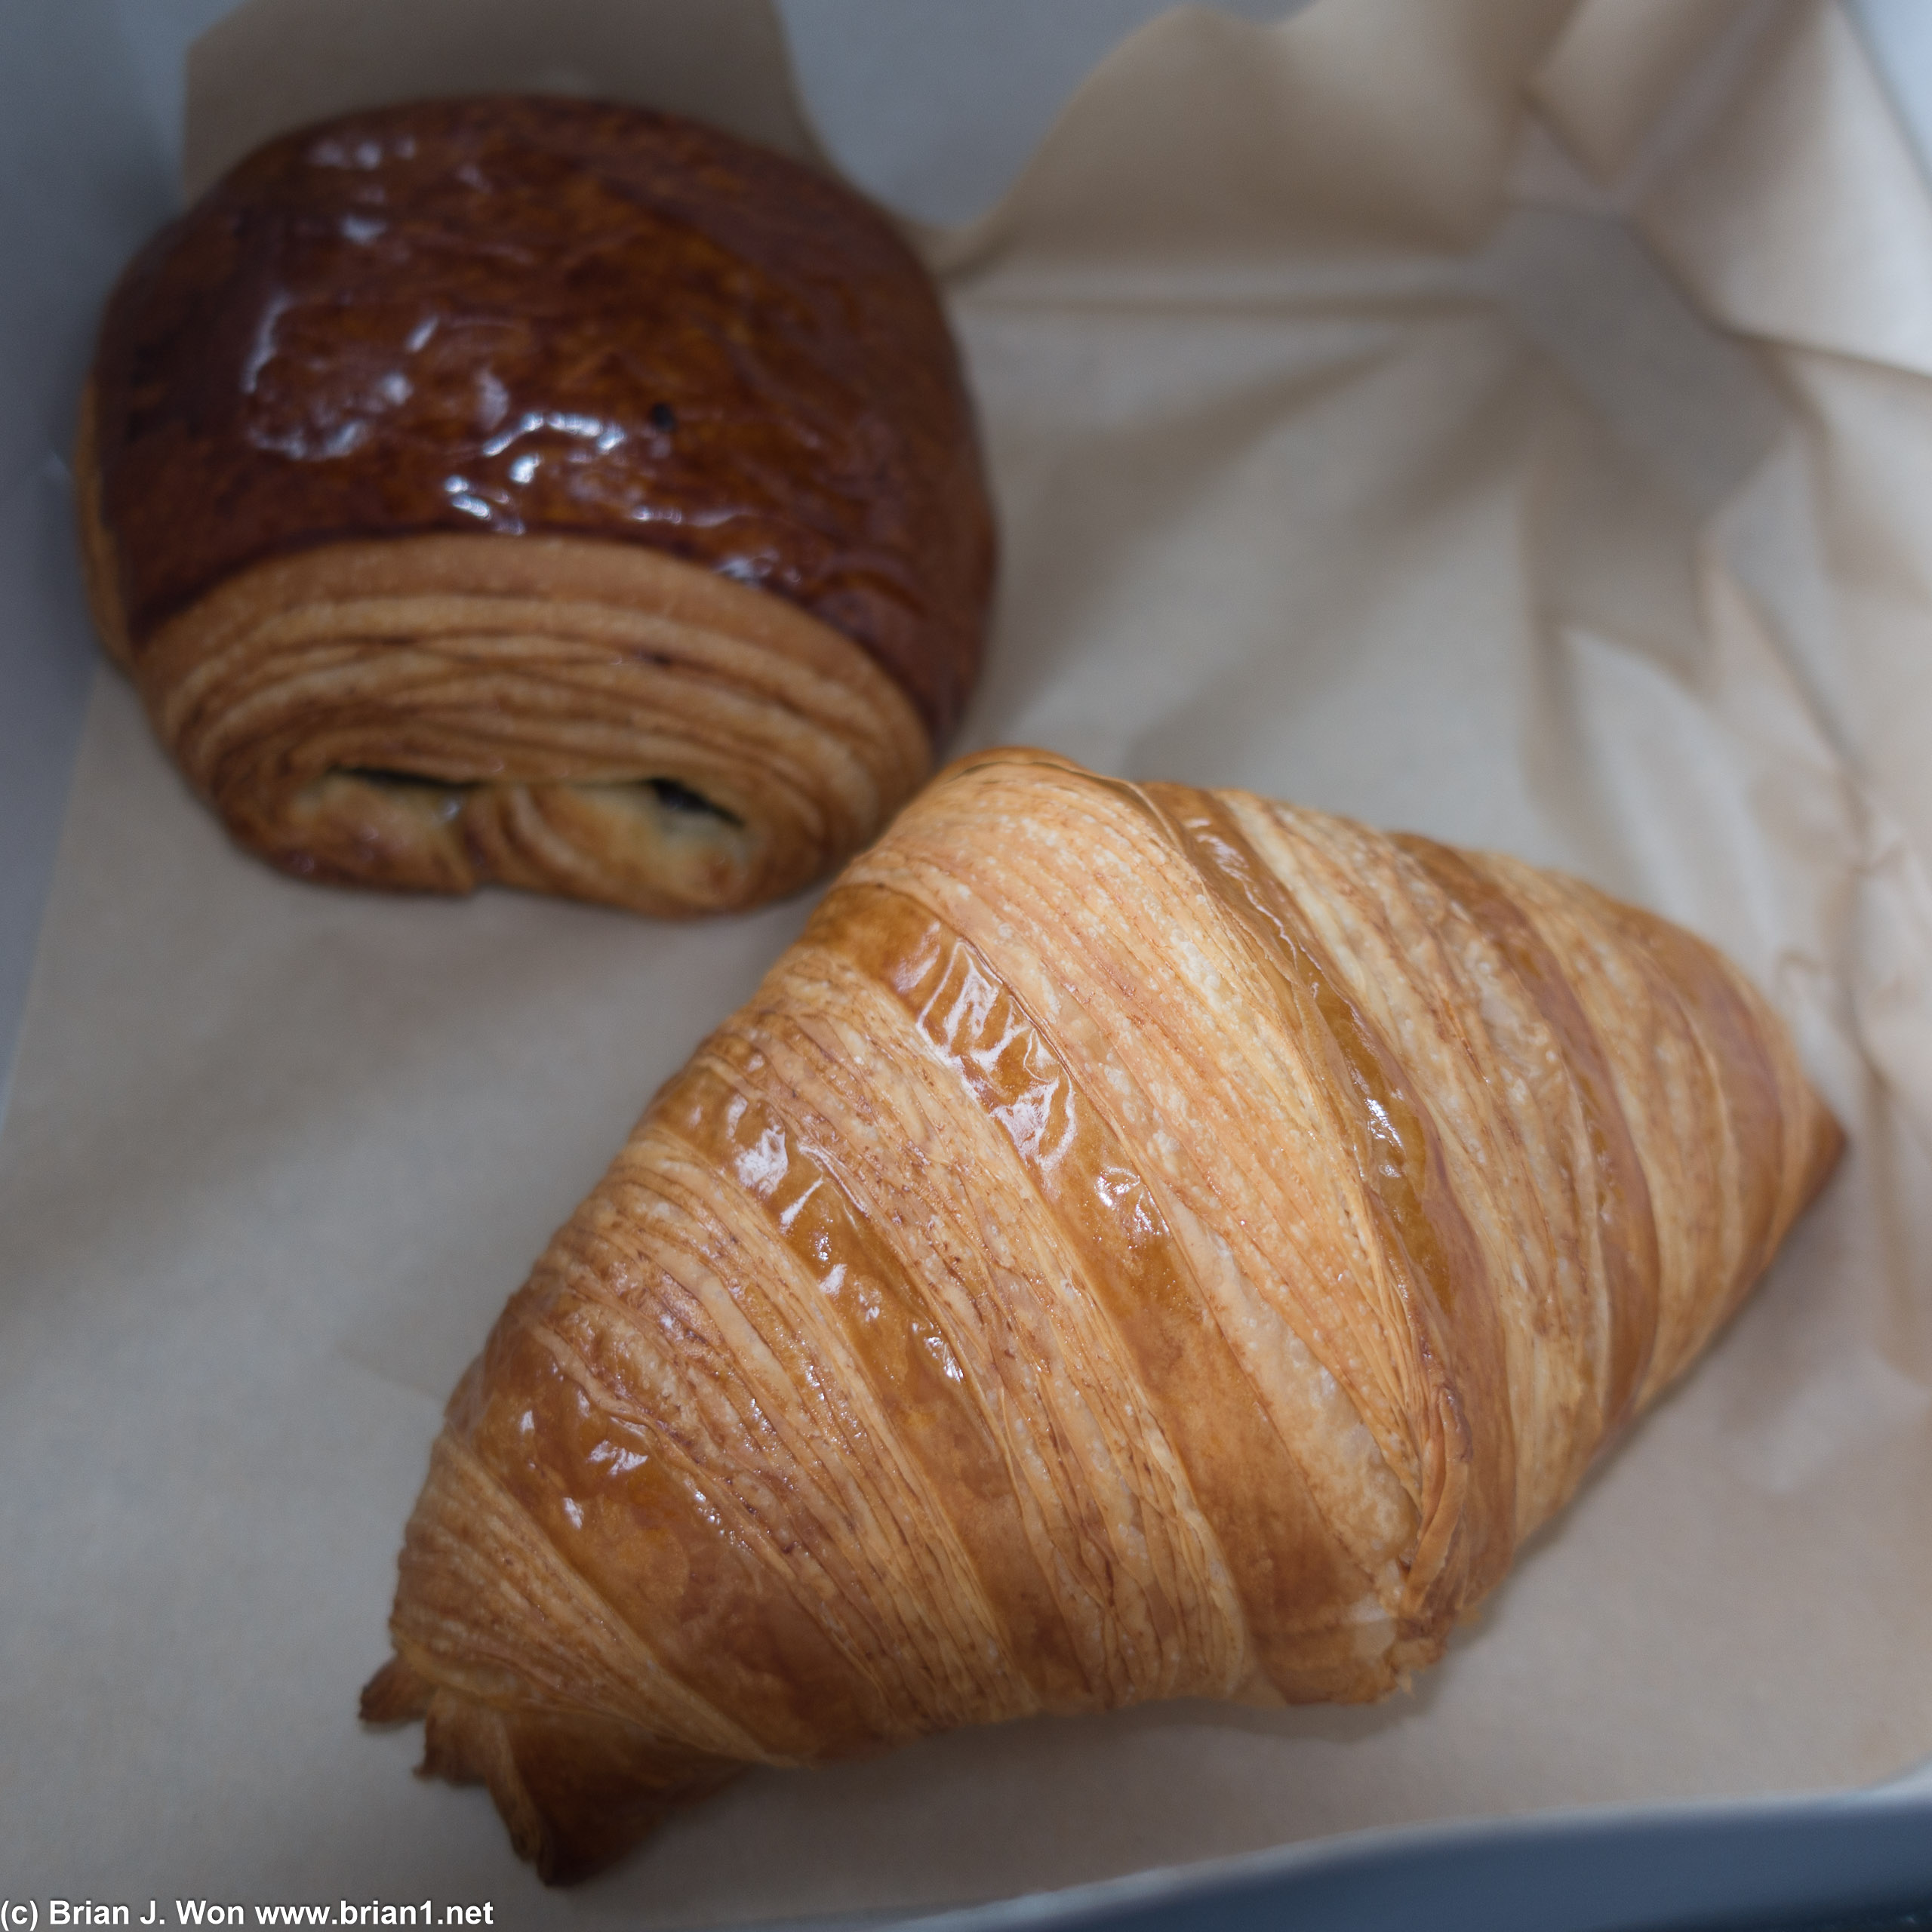 And with a regular croissant.